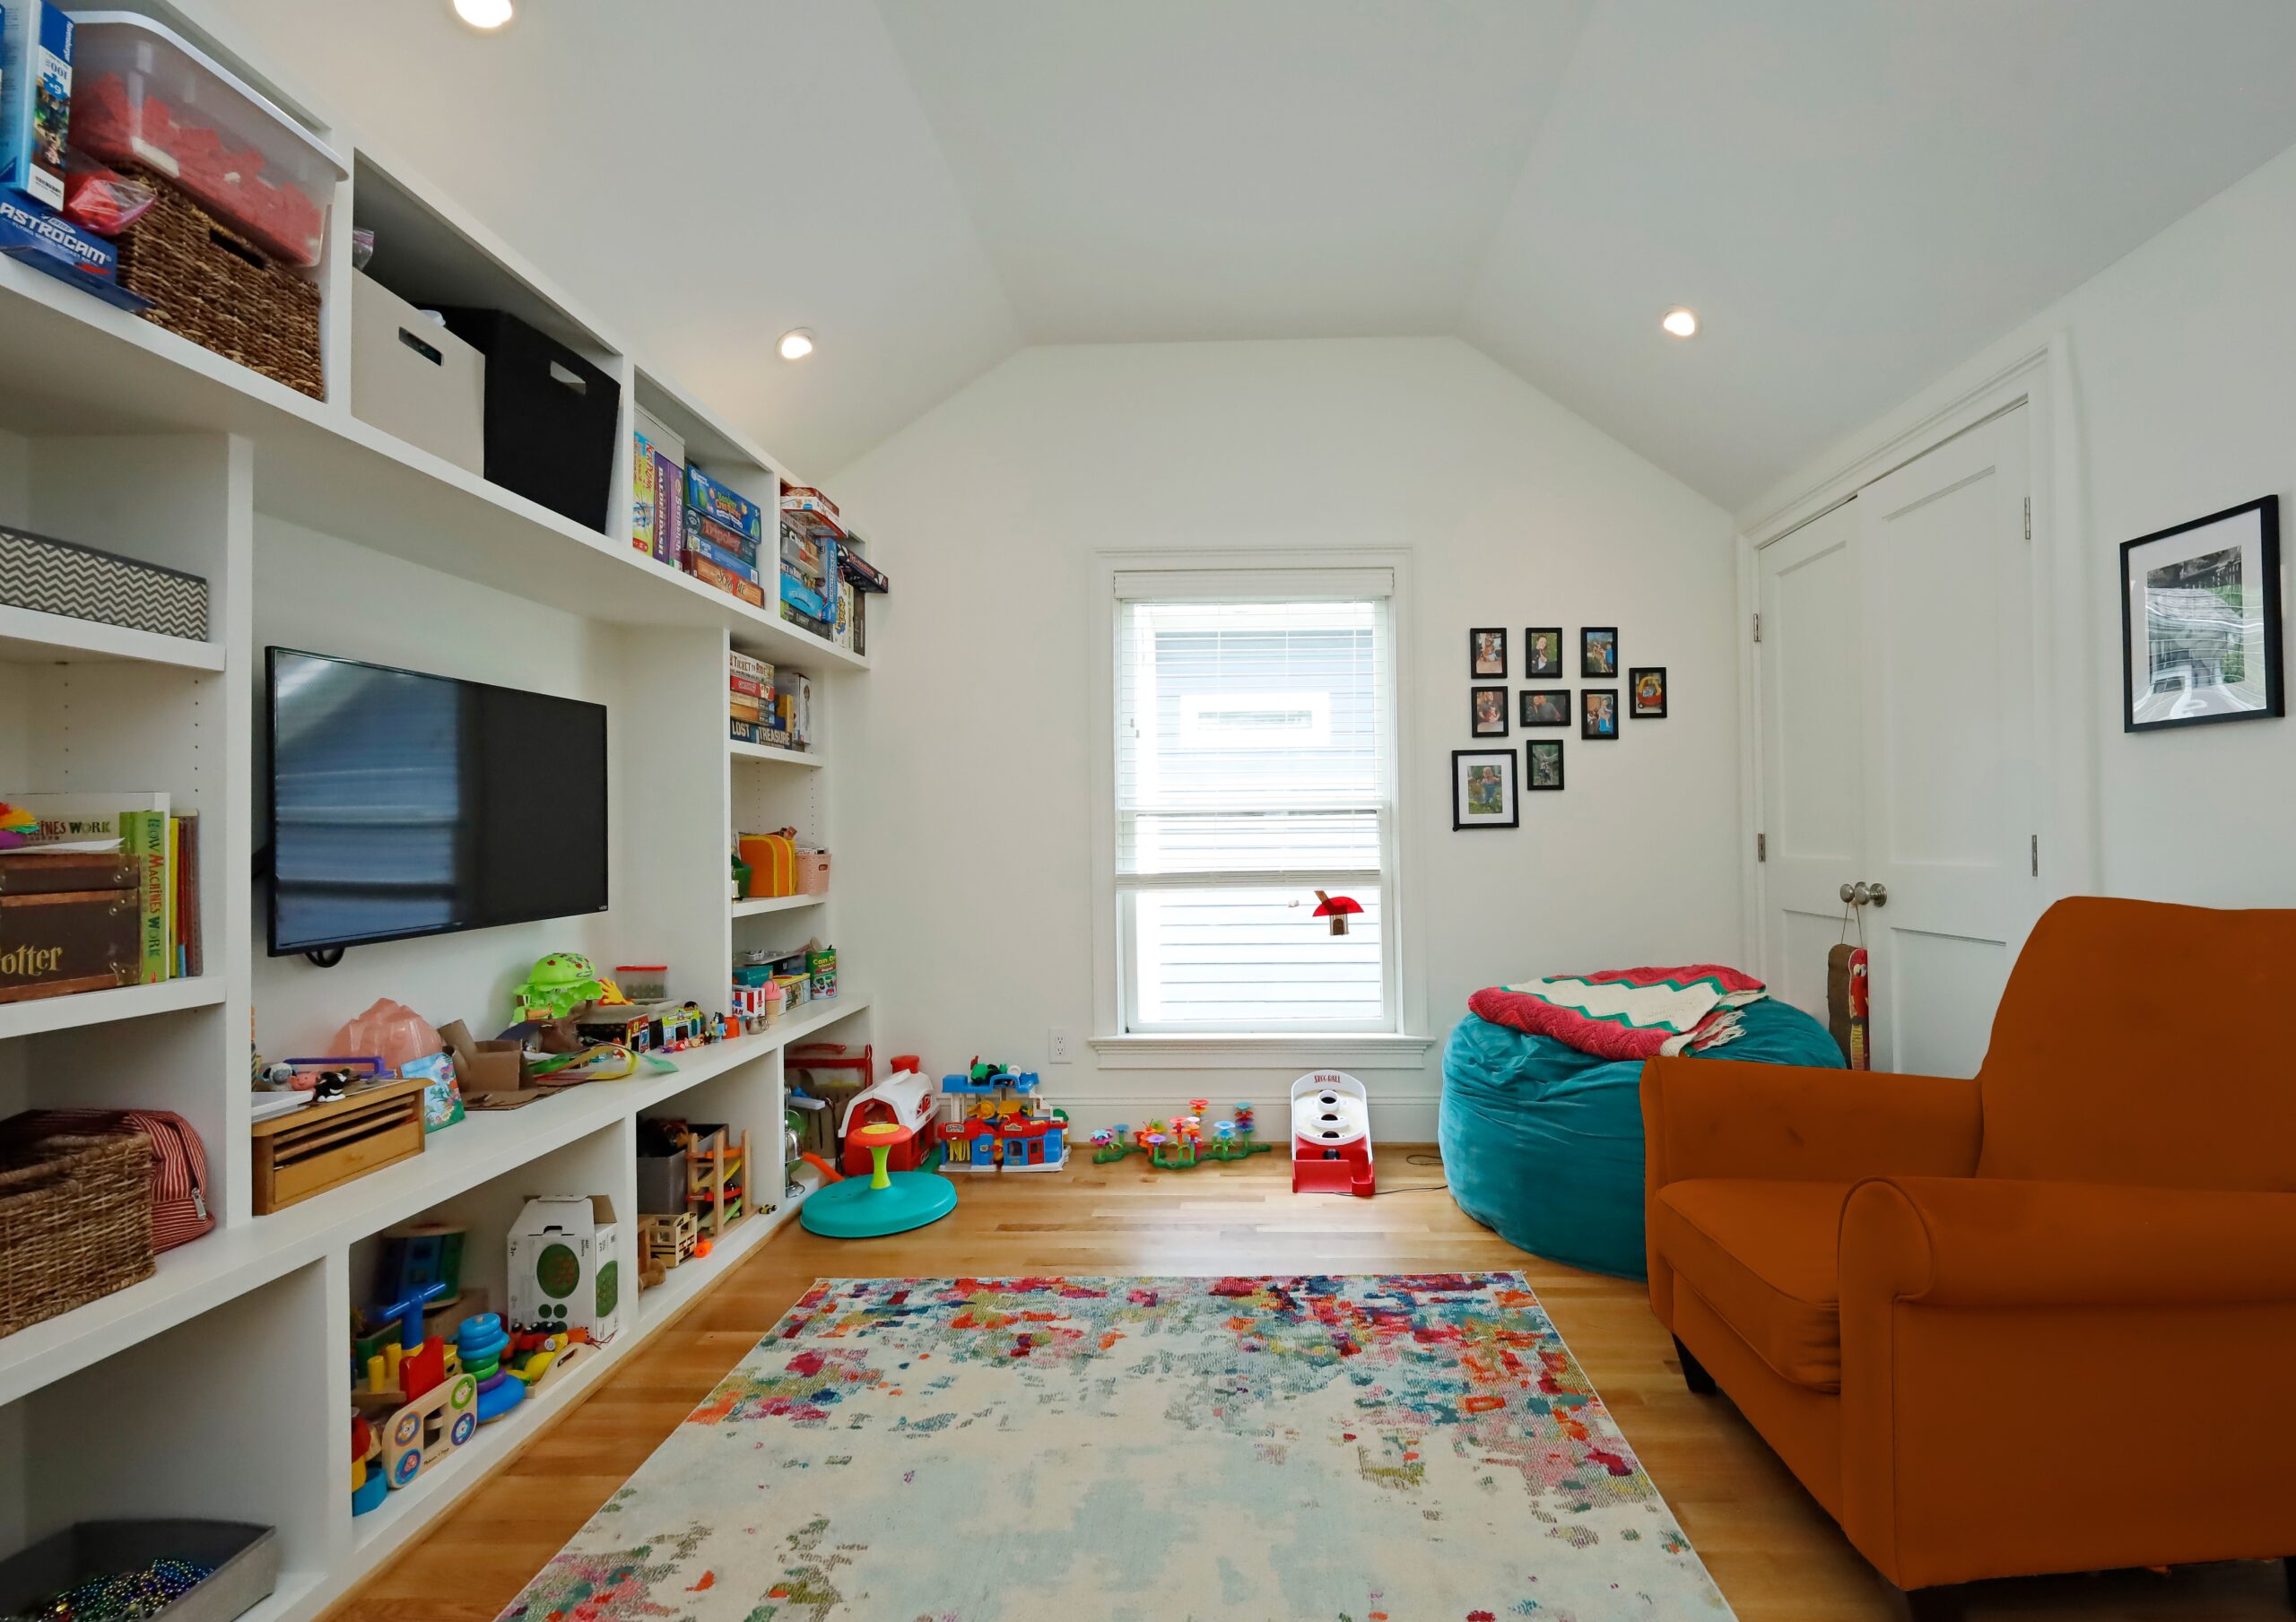 A bright and open playroom space with a wall of built-in storage for games, toys and and entertainment center.